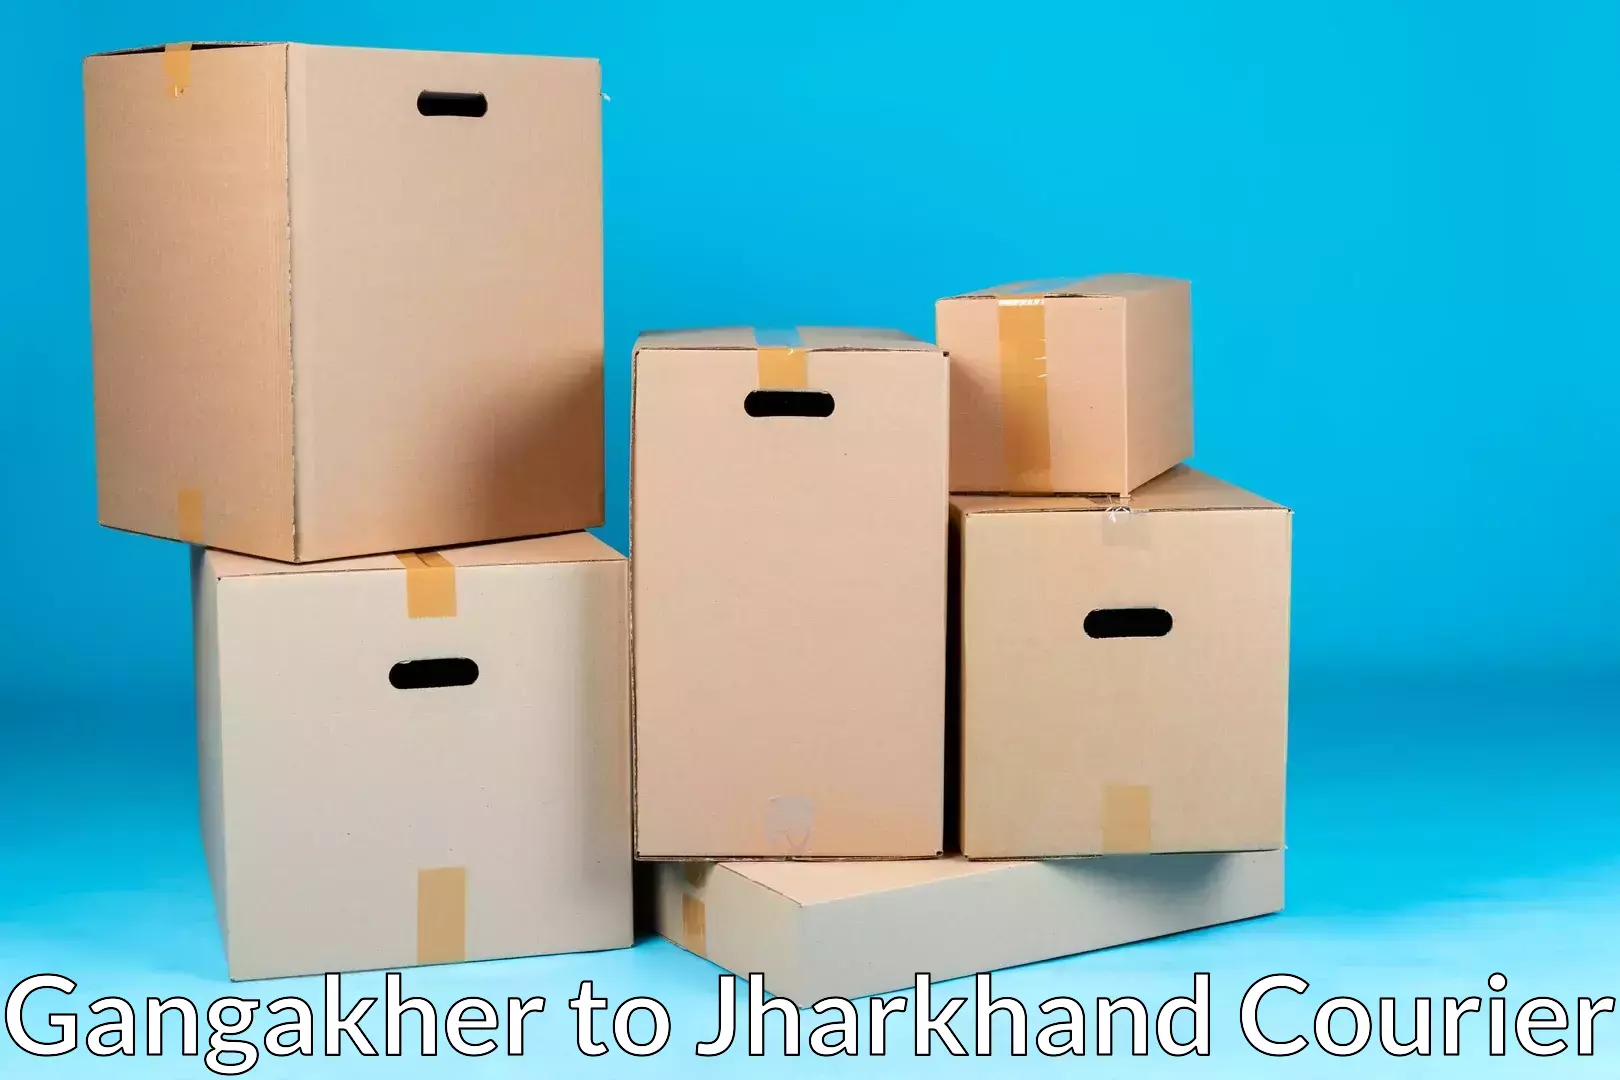 Home shifting experts Gangakher to Jharkhand